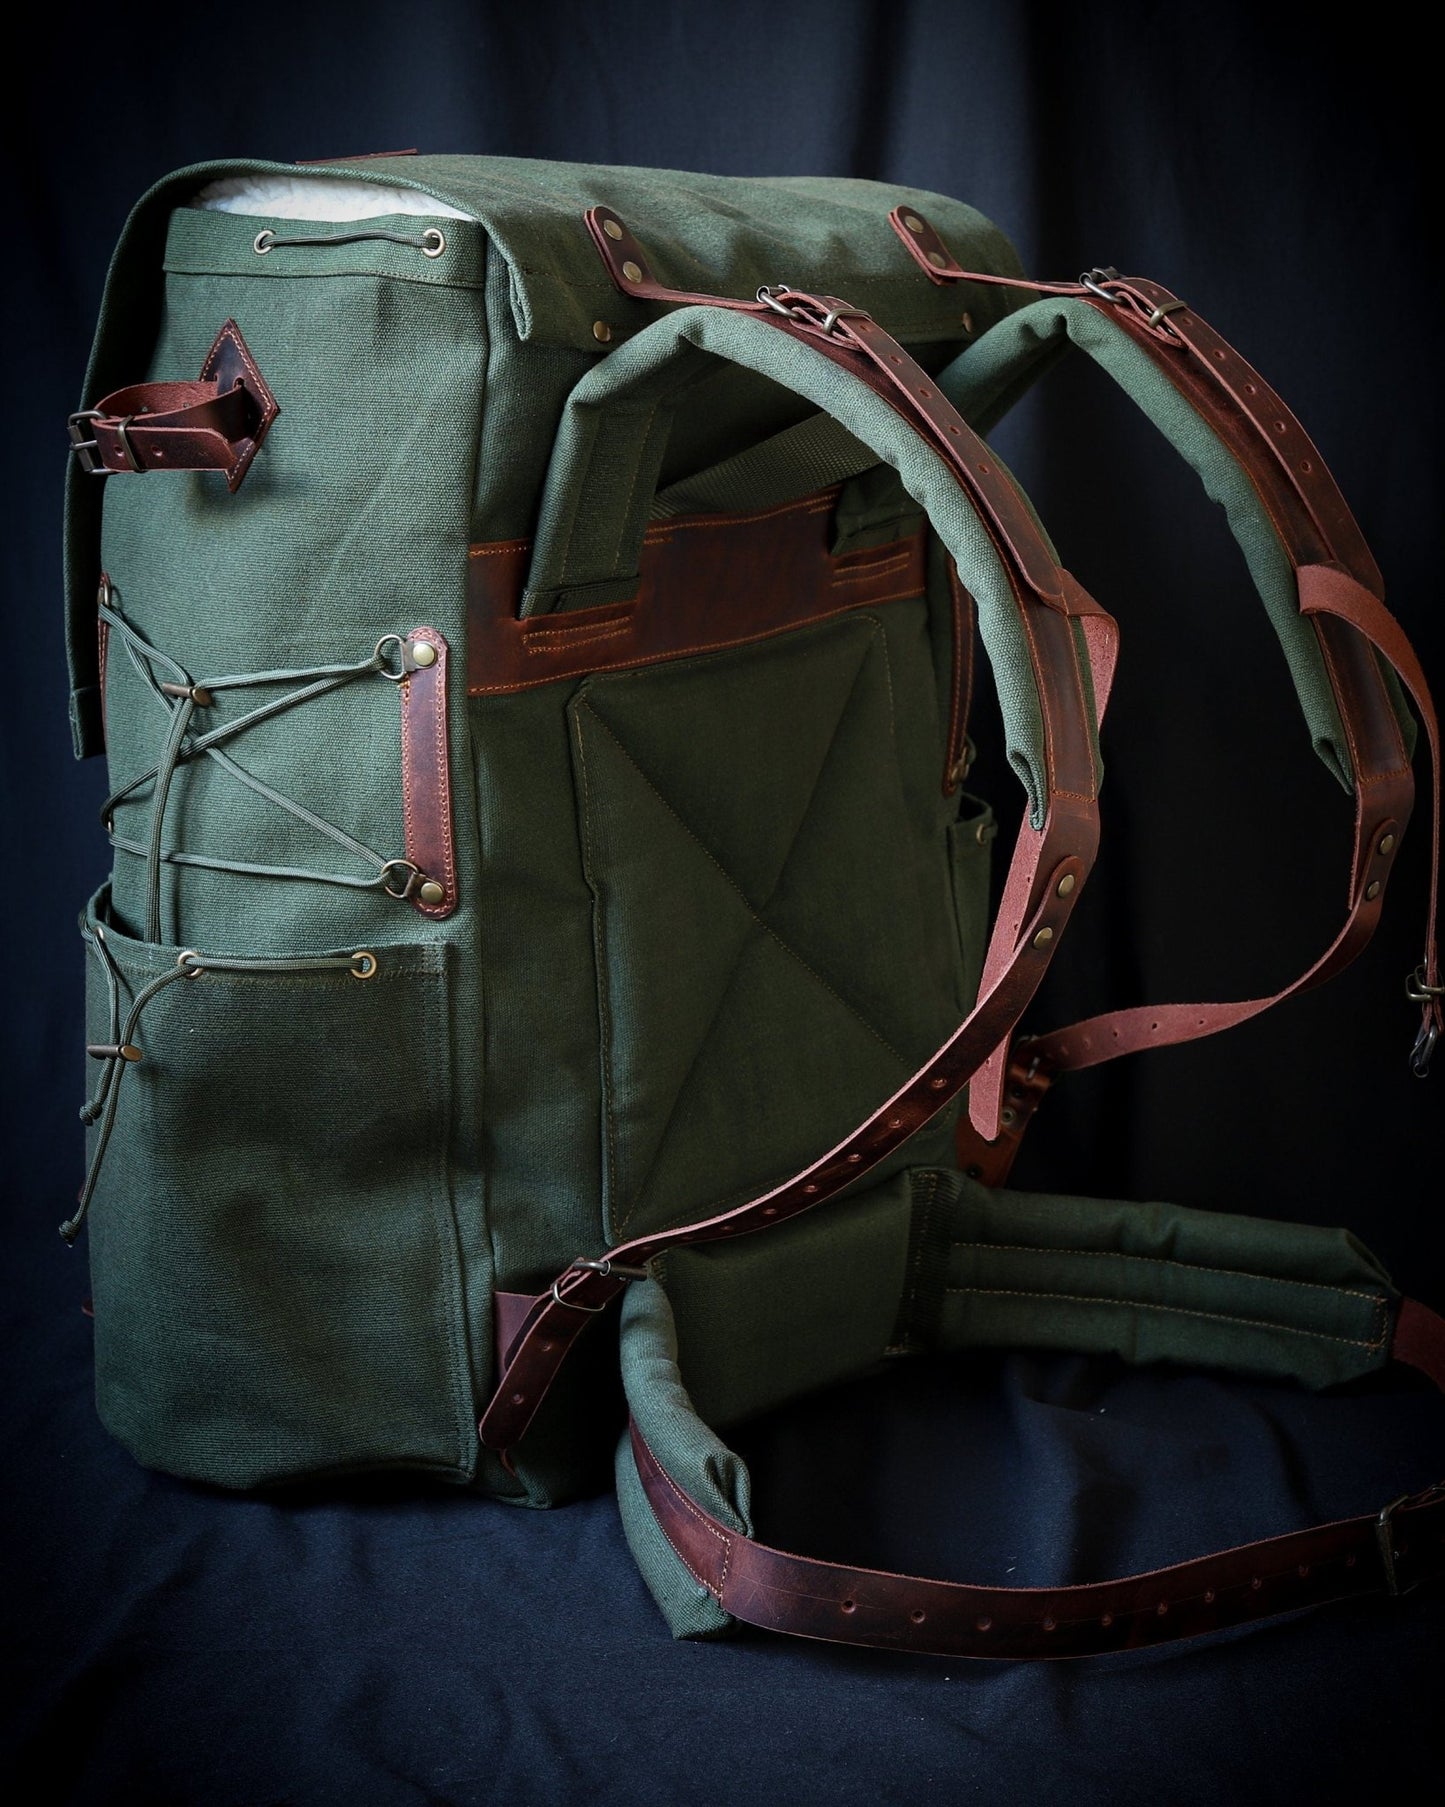 50L | 3 Pieces Left | Green, Brown, Dhaki Colours | Handmade Leather, Waxed Canvas Backpack for Travel, Camping, Bushcraft | Personalization  99percenthandmade Khaki Green 30 Liters 